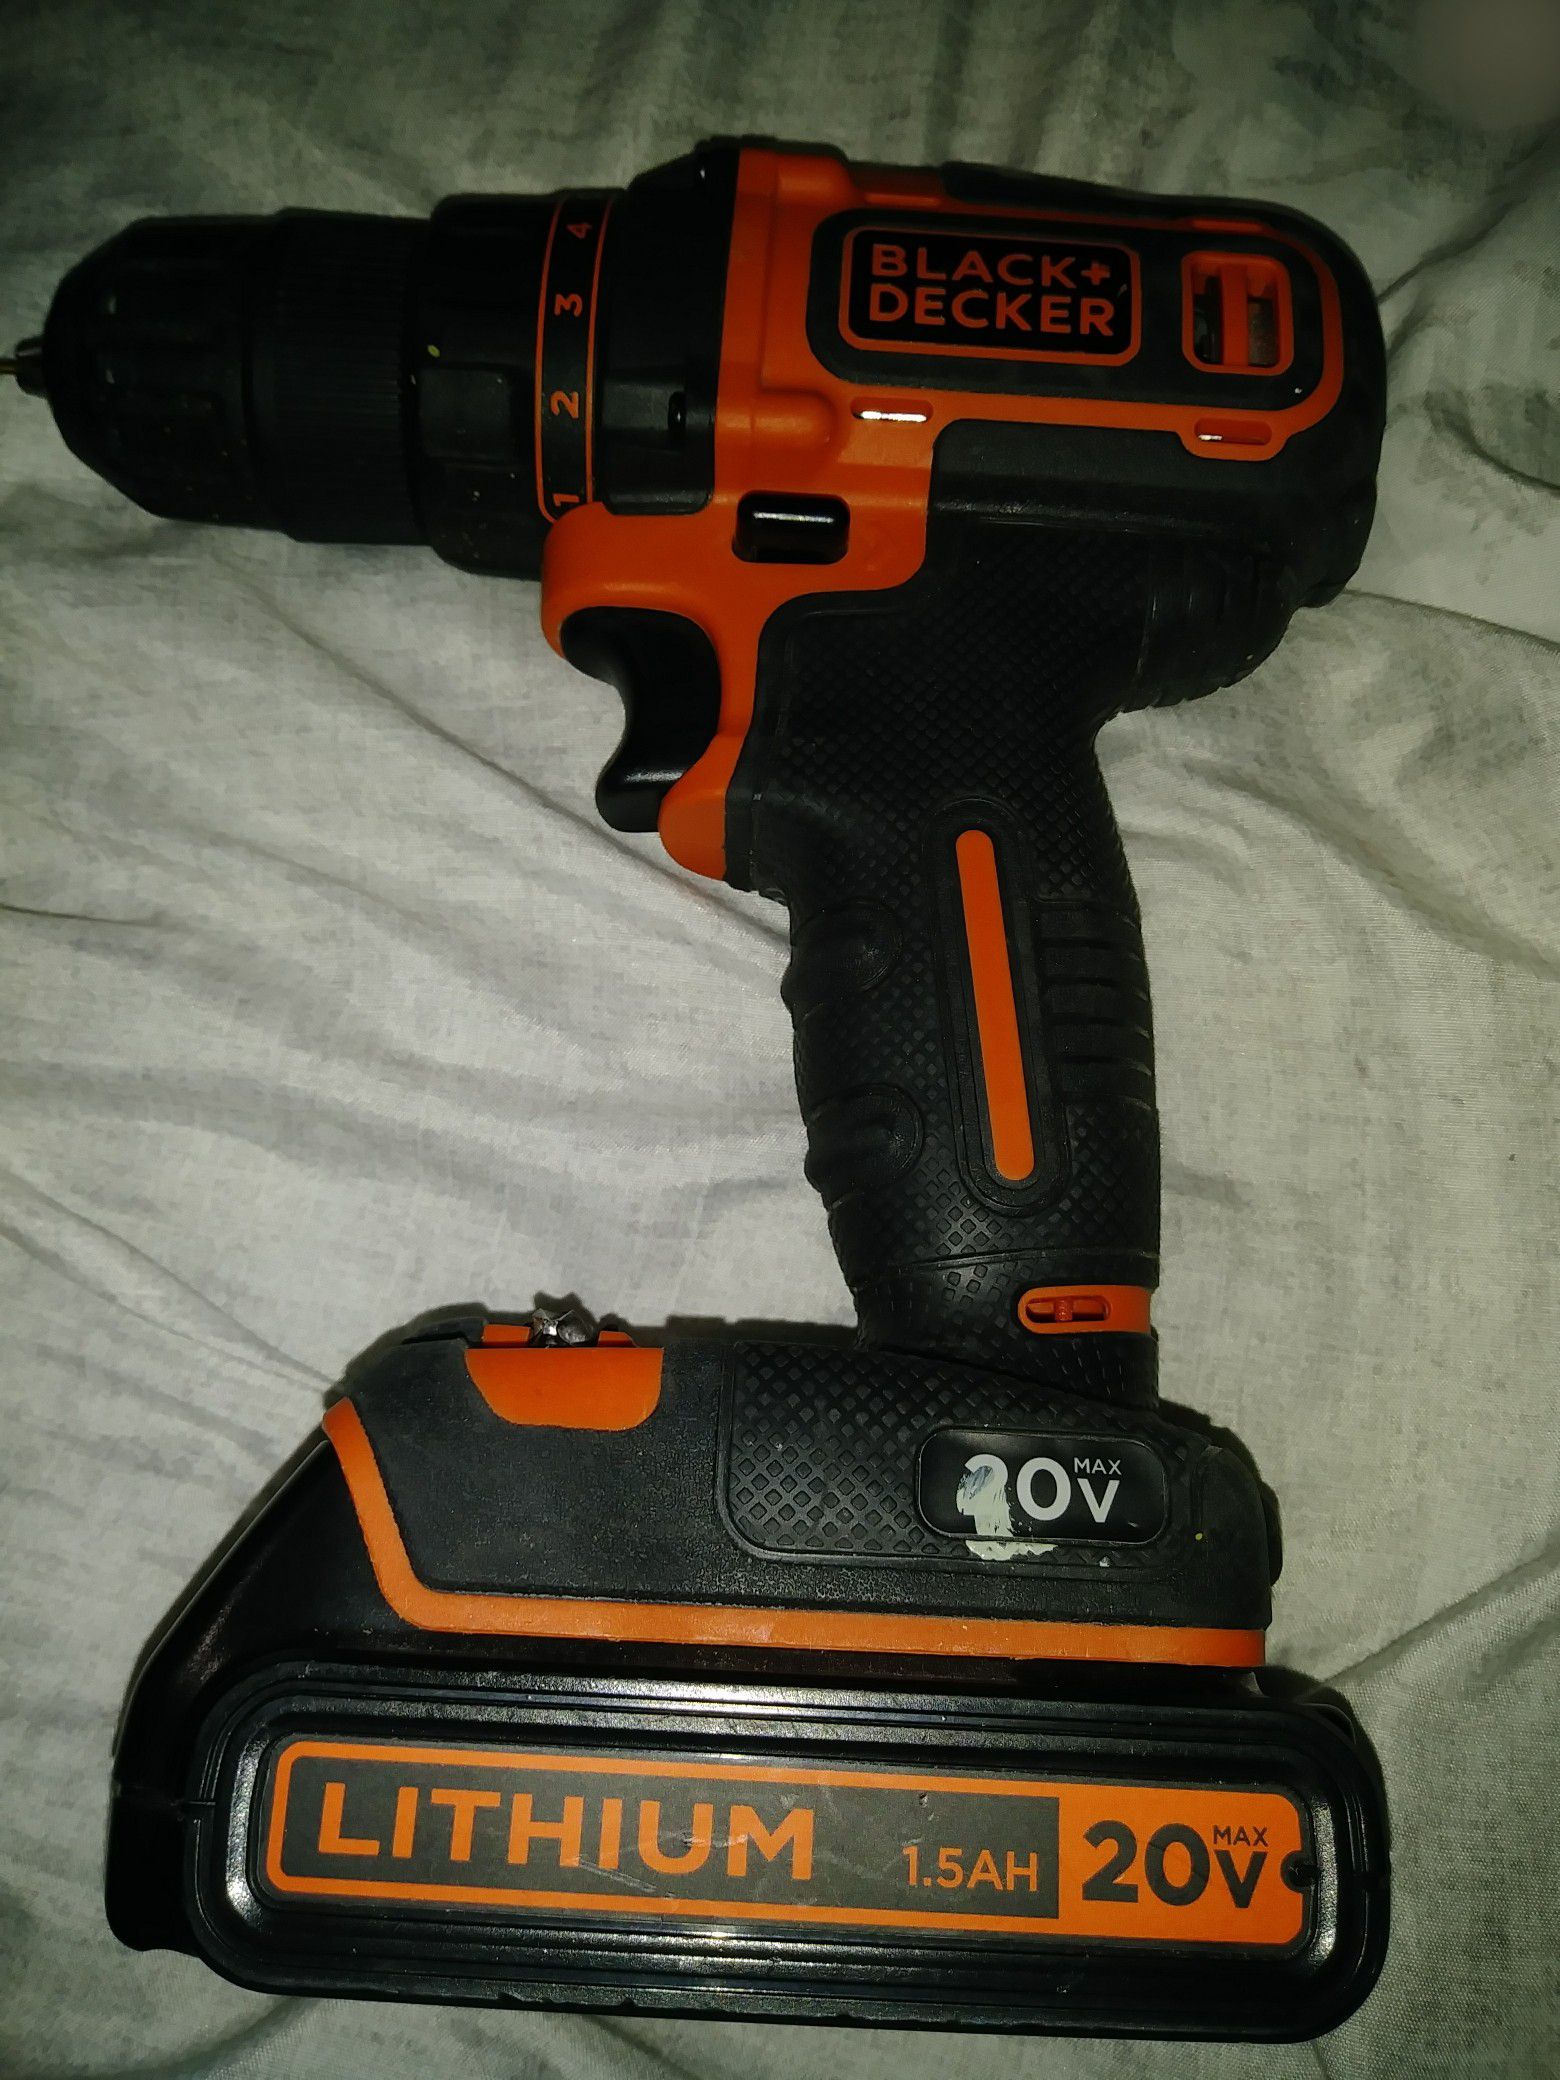 Bllack and decker battery powered drill works perfect lithium 1.5 AH, 20V. Hablo español